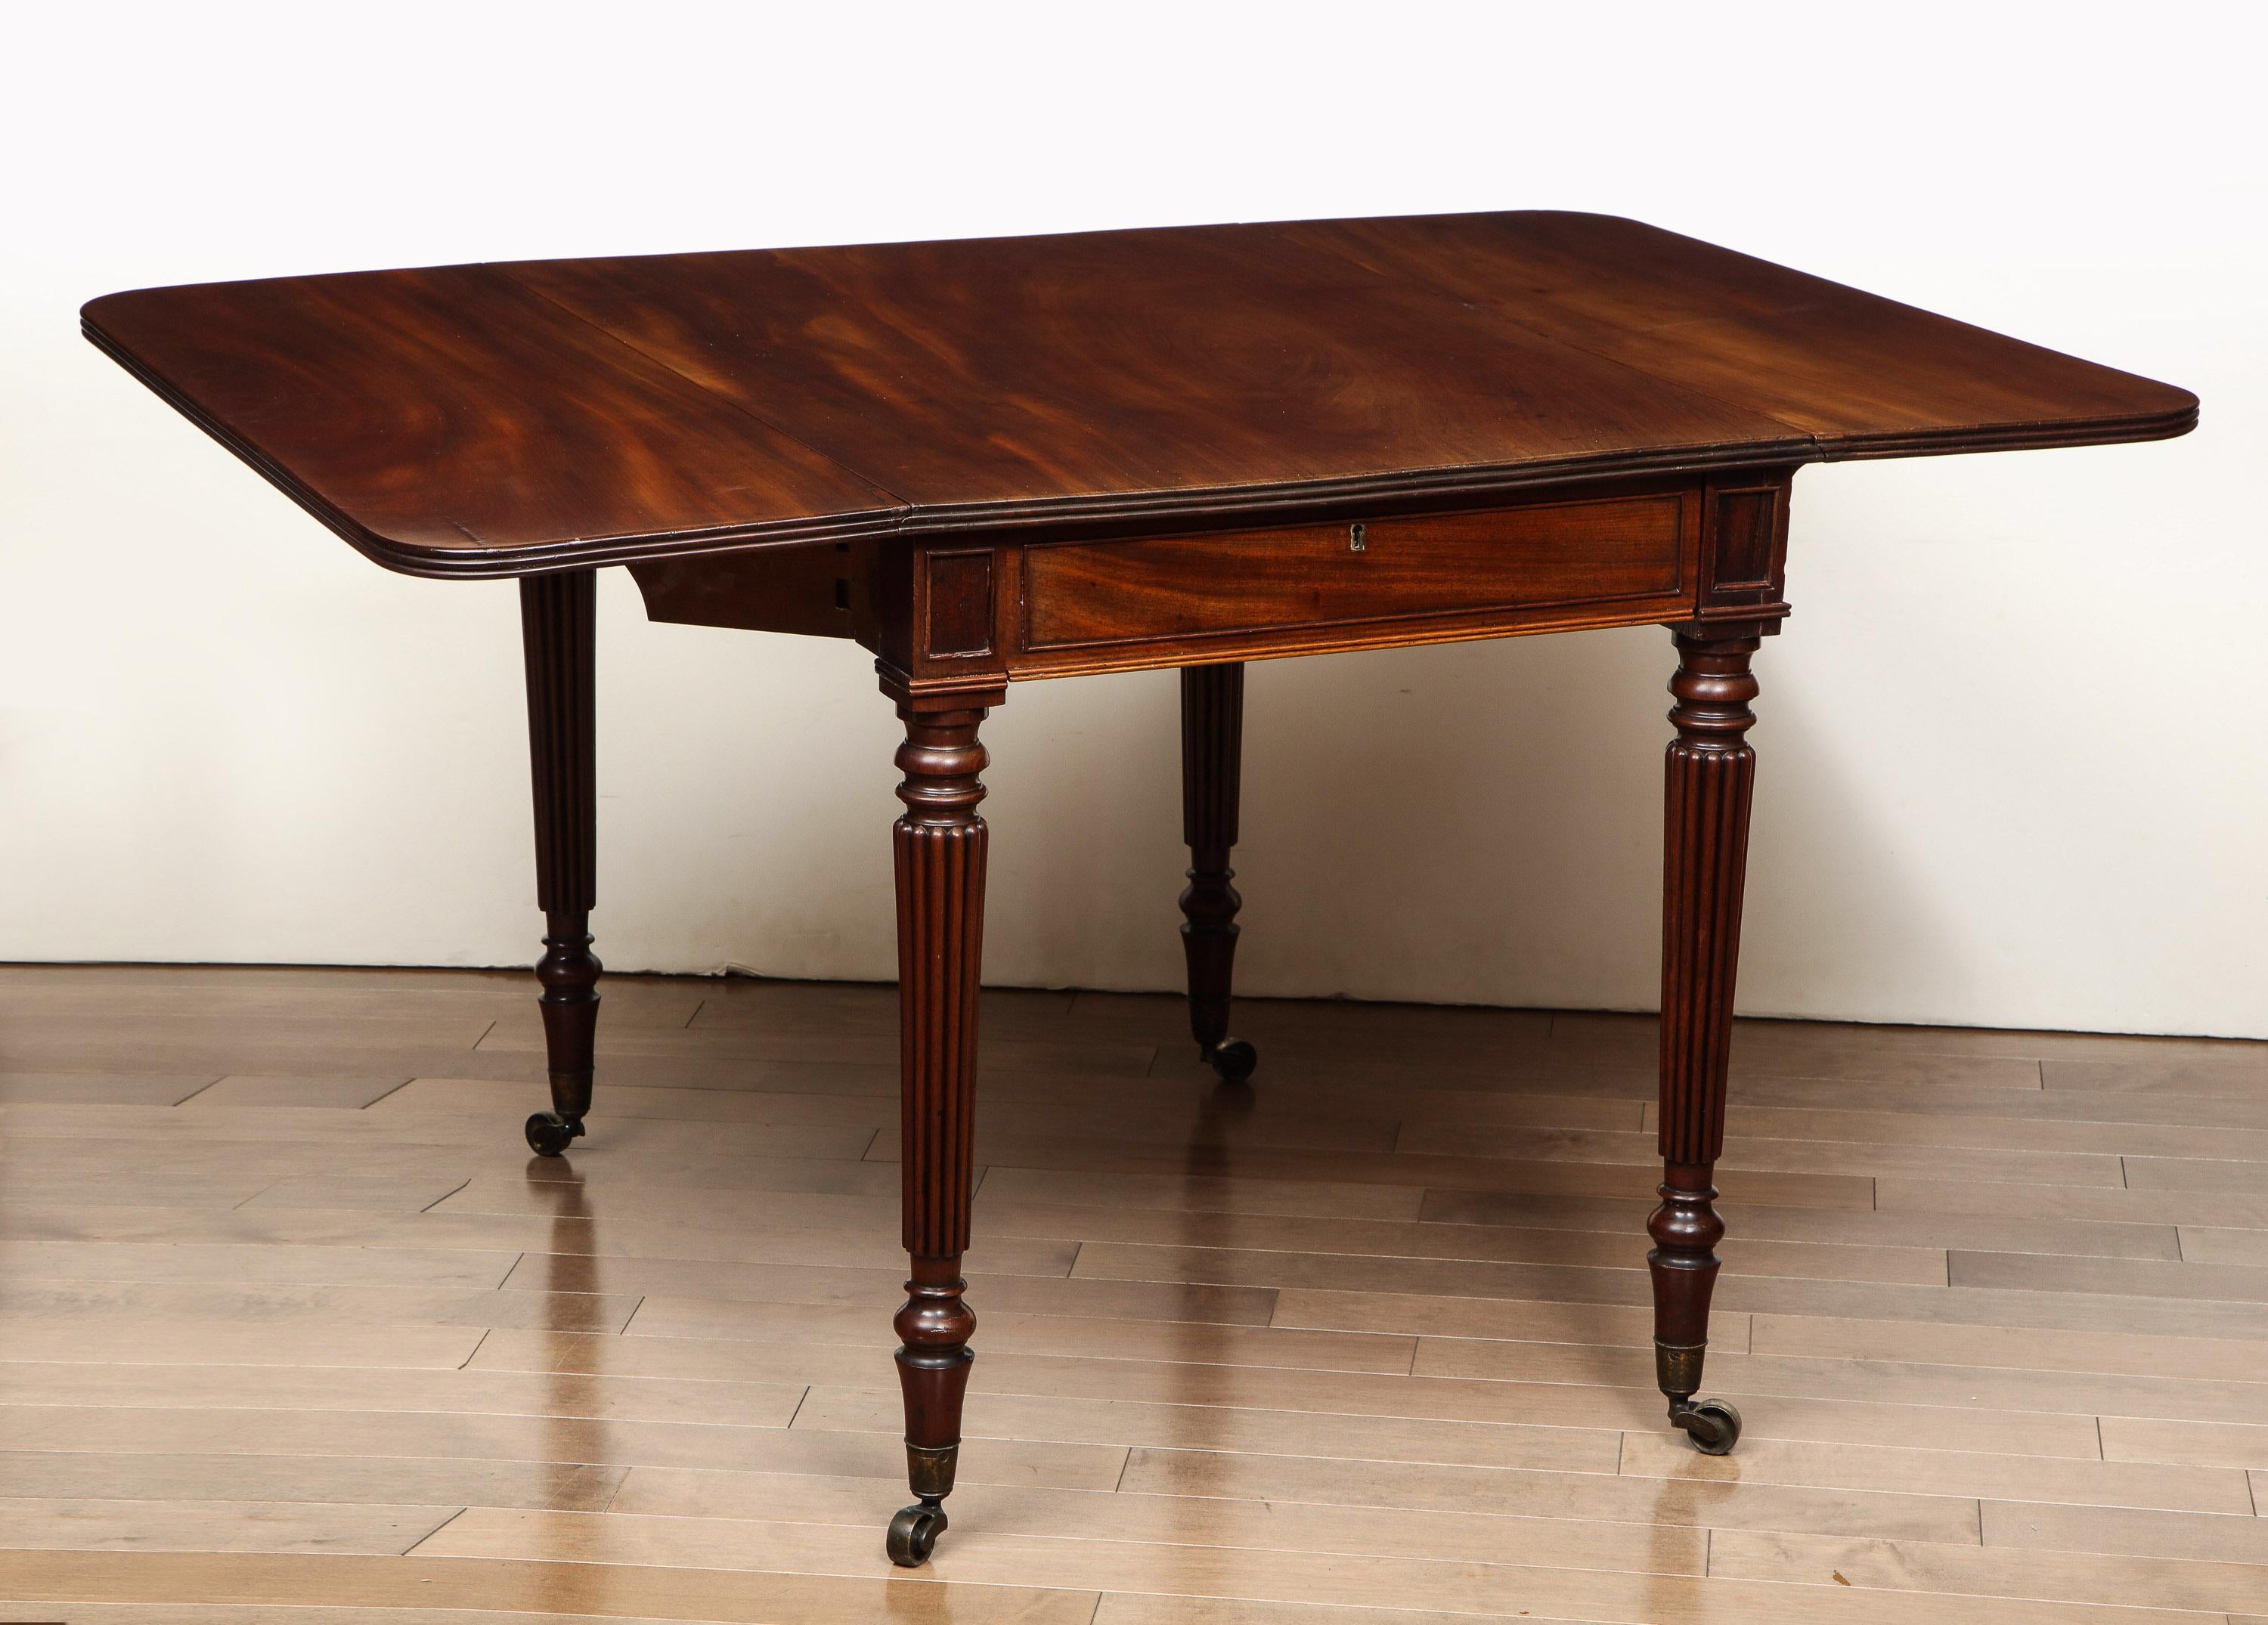 Early 19th Century 19th Century English Pembroke Table with One Drawer in Mahogany